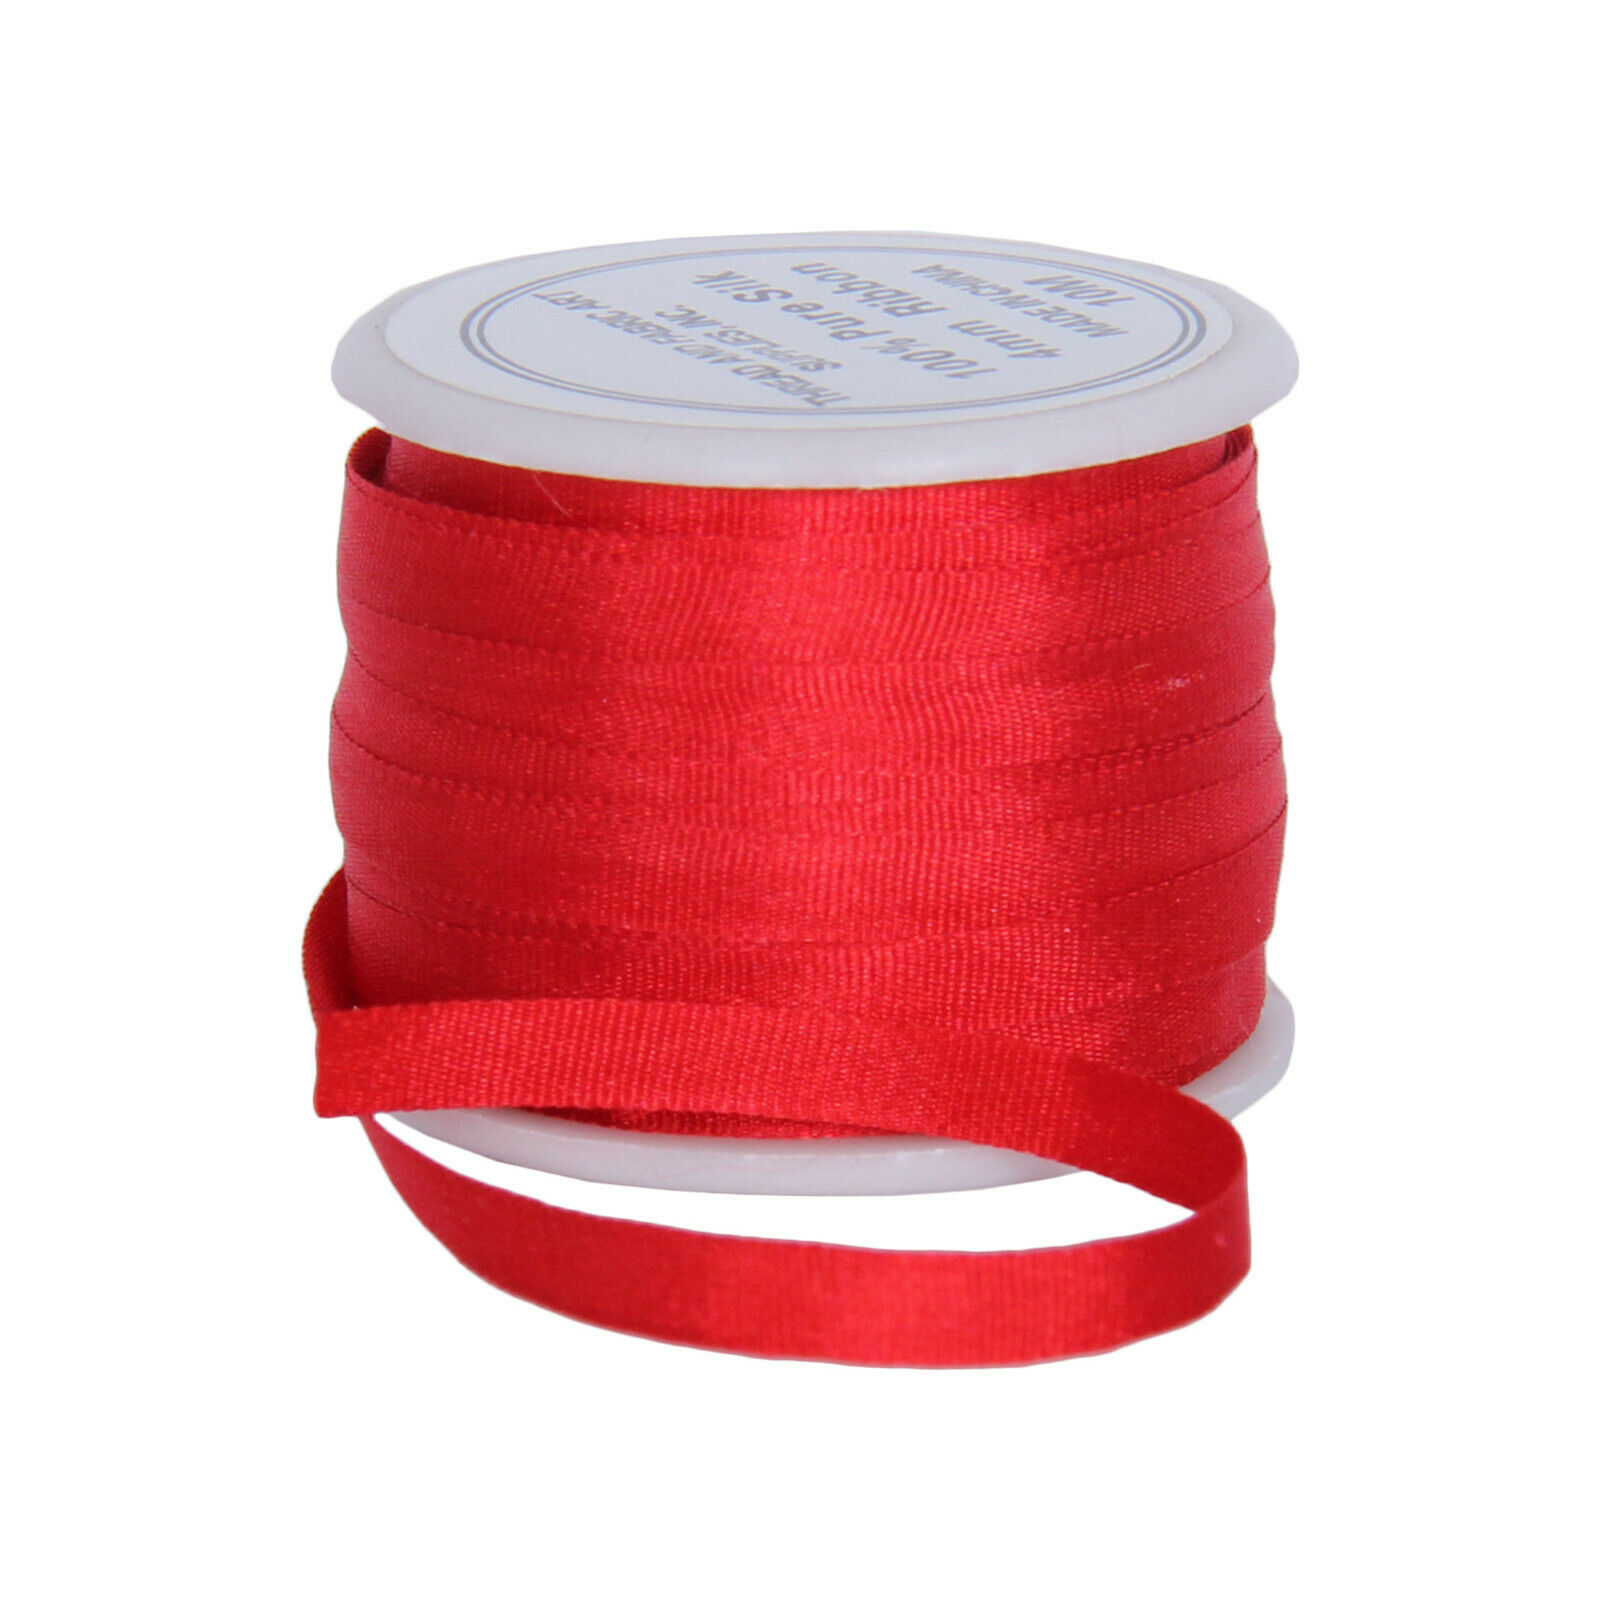 Threadart 100% Pure Silk Ribbon - 4mm Red - No. 539- 3 Sizes - 50 Colors Availab